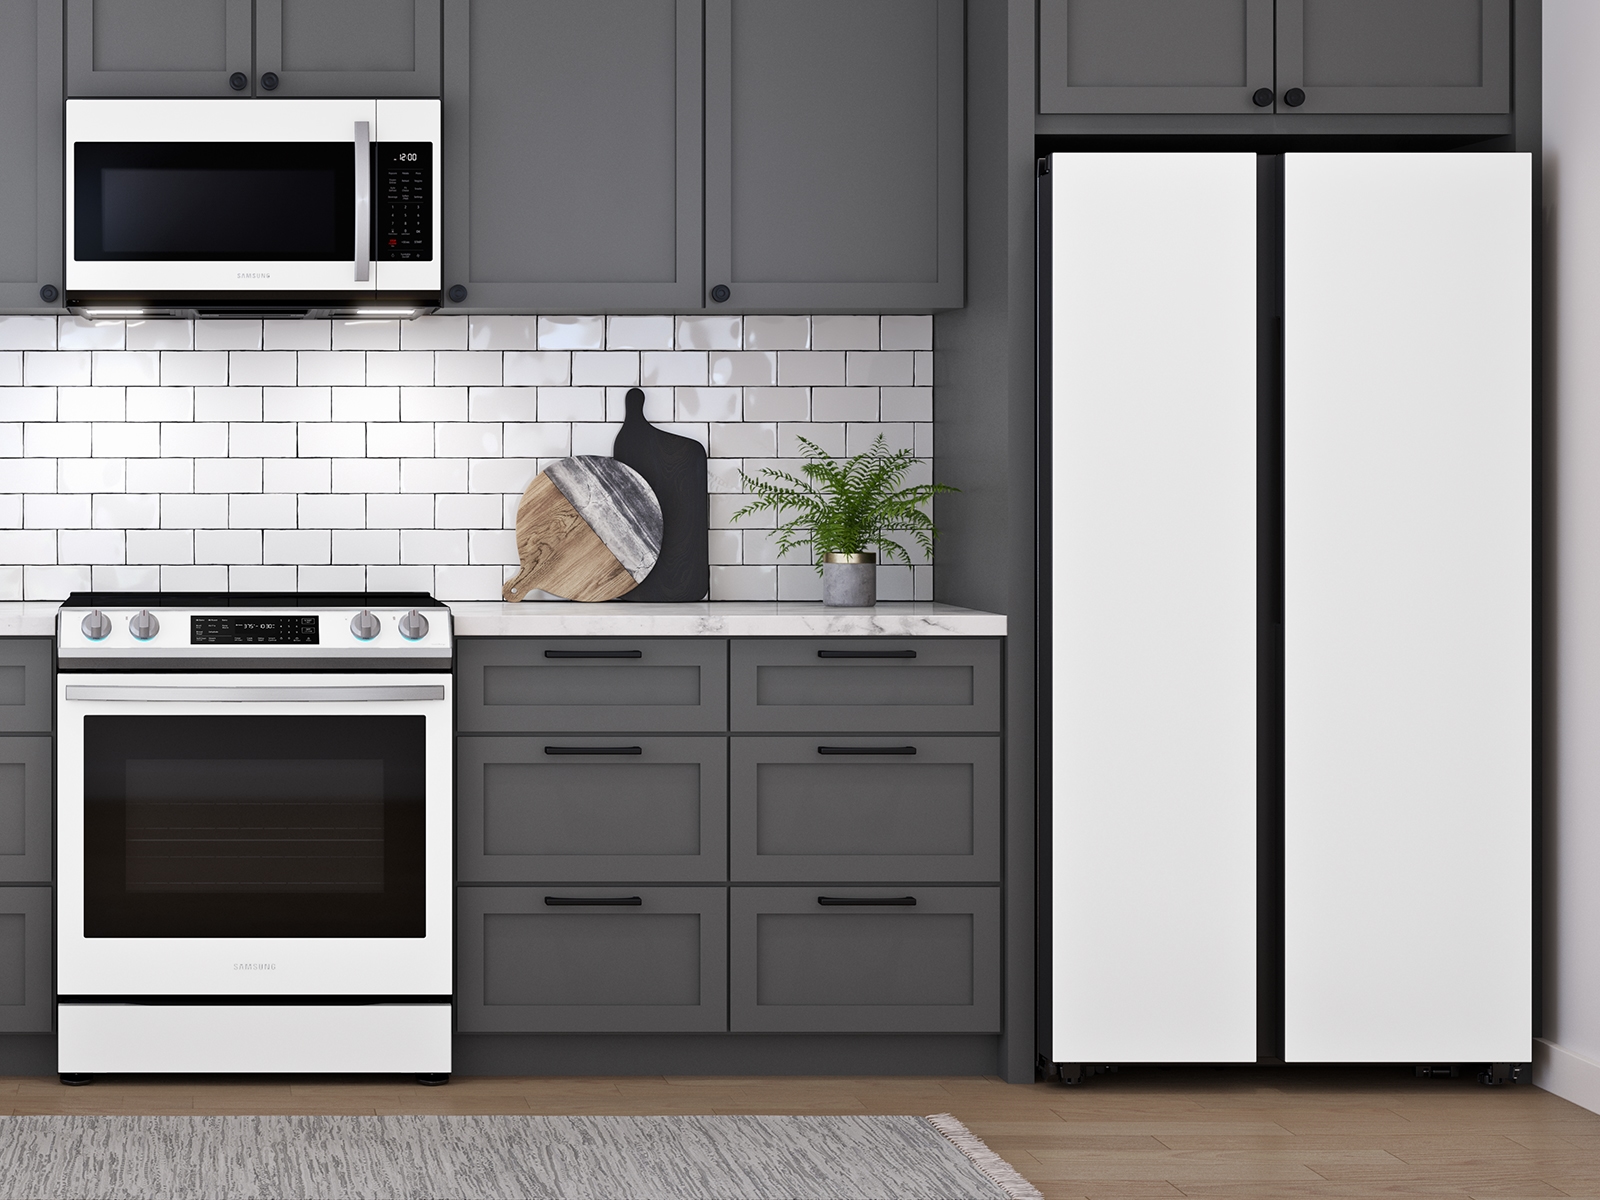 Samsung Expands Bespoke Refrigerator Lineup with New Side-By-Side Model -  Samsung US Newsroom